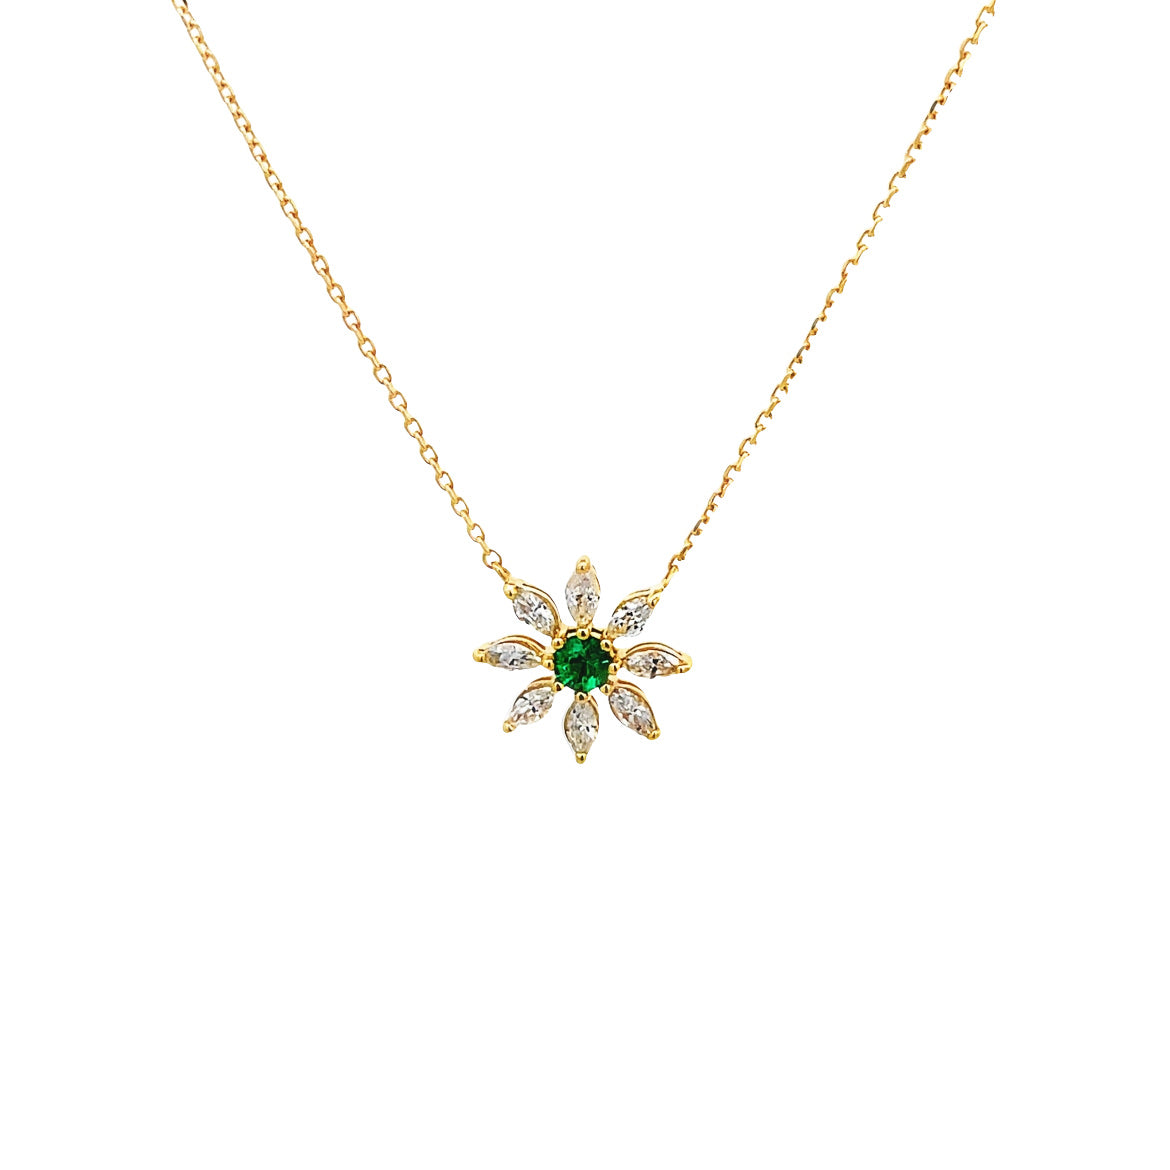 18K GOLD DIAMOND FLOWER NECKLACE WITH EMERALD